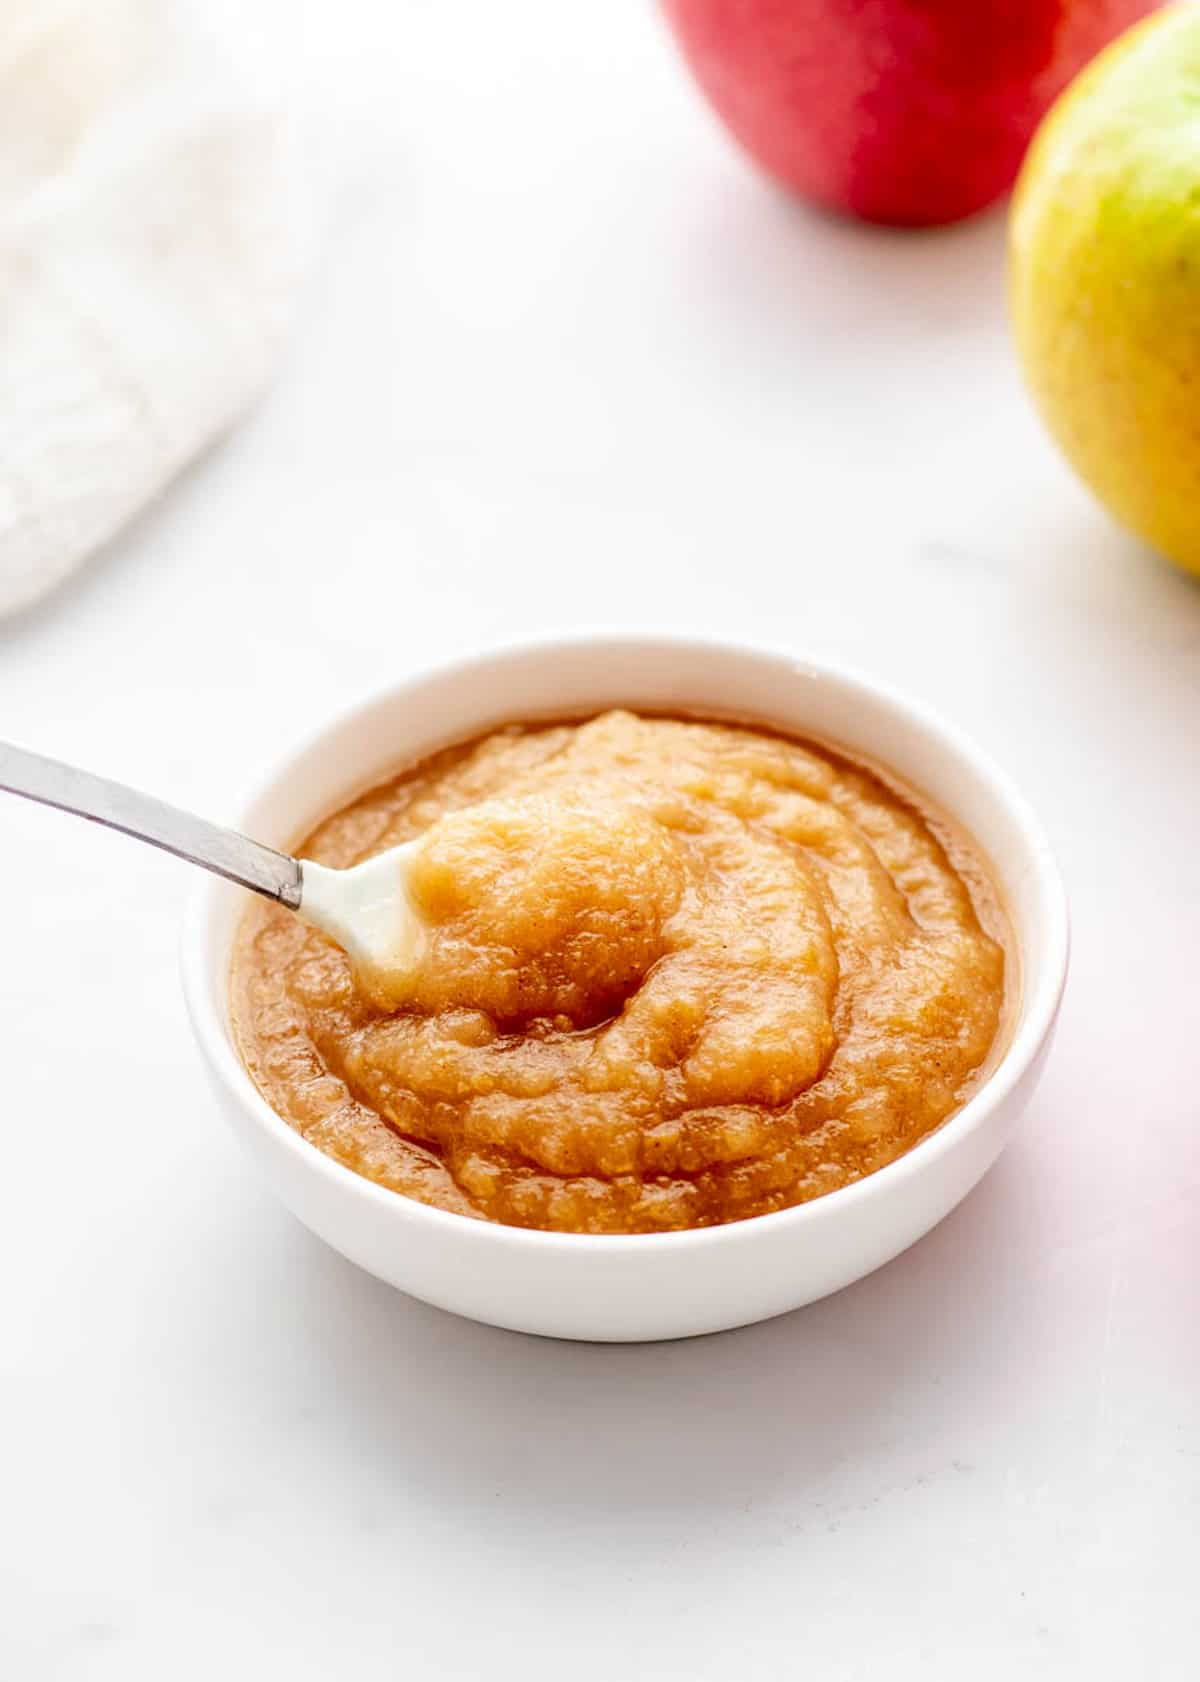 A spoon scooping up some homemade applesauce from a little white bowl.